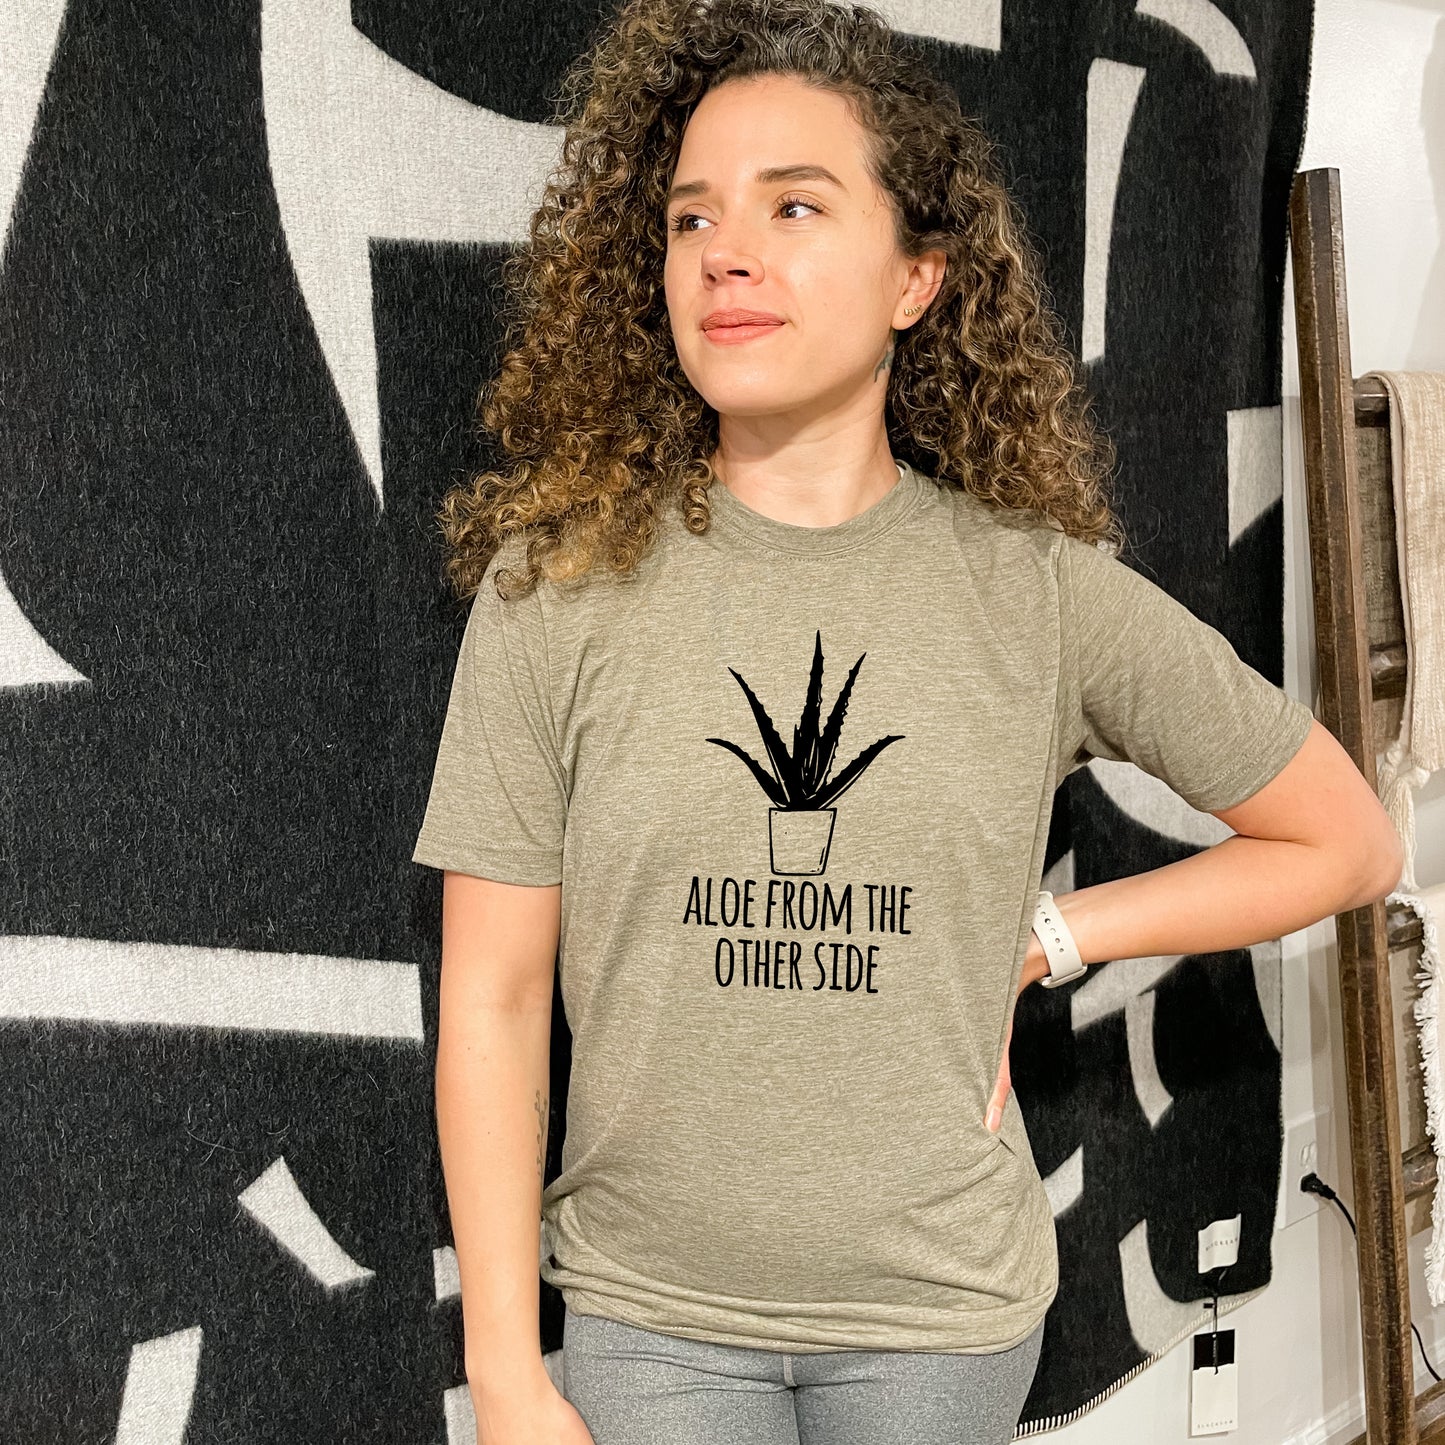 Aloe From The Other Side - Men's / Unisex Tee - Stonewash Blue or Sage